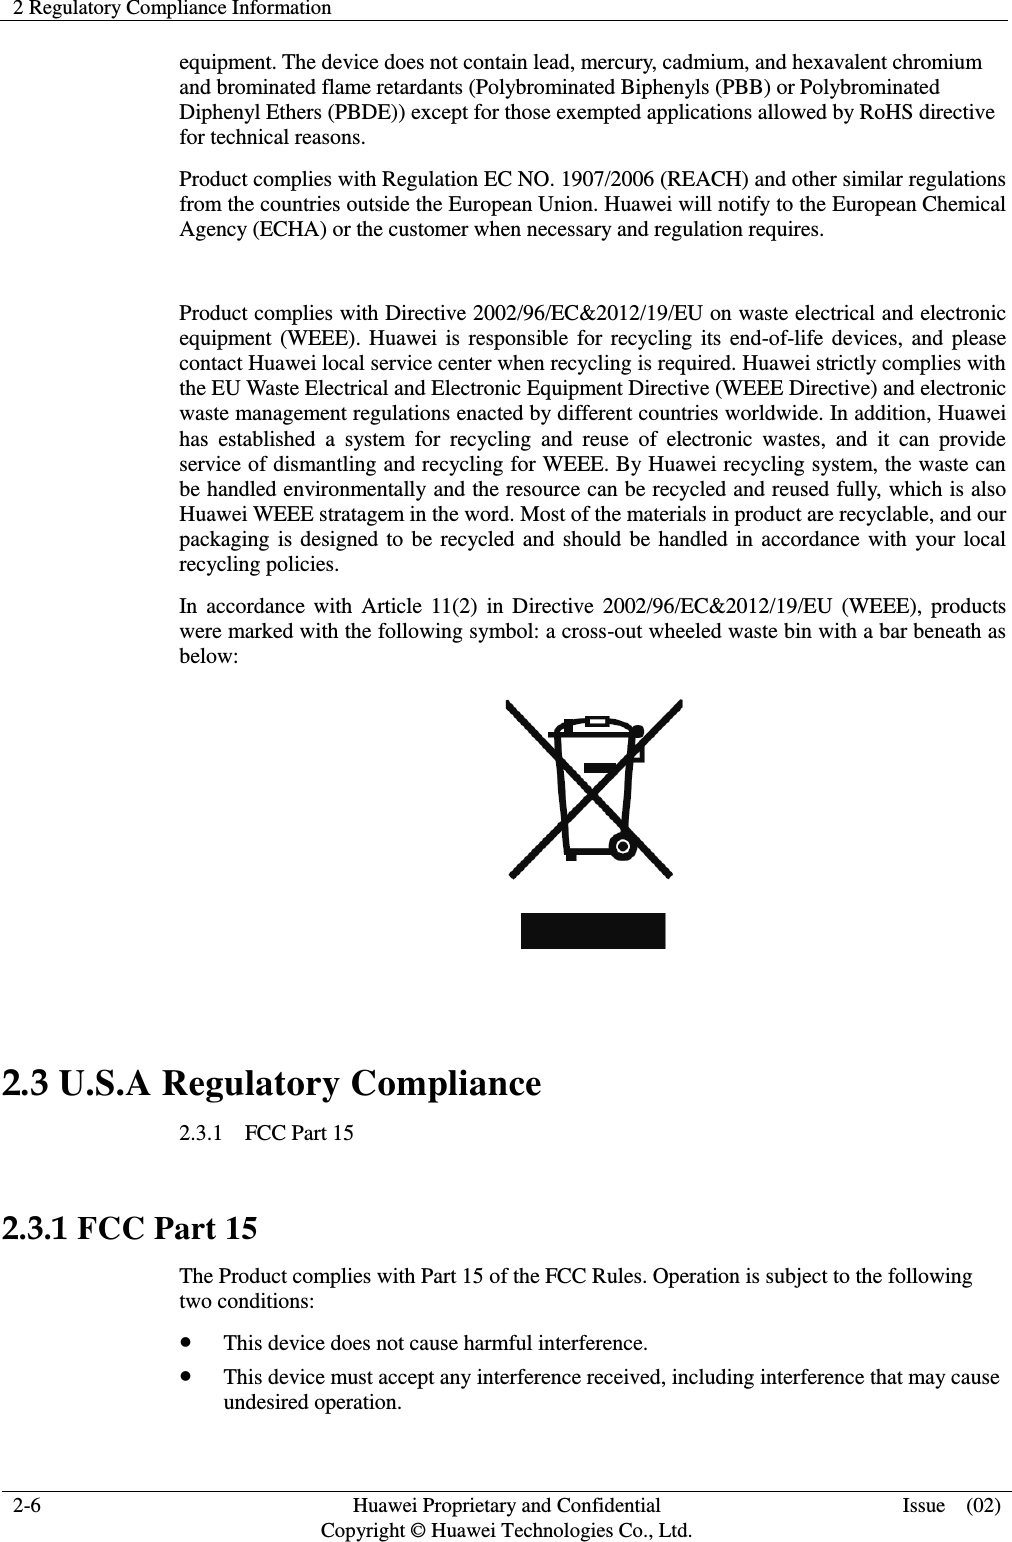 2 Regulatory Compliance Information    2-6 Huawei Proprietary and Confidential         Copyright © Huawei Technologies Co., Ltd. Issue    (02)  equipment. The device does not contain lead, mercury, cadmium, and hexavalent chromium and brominated flame retardants (Polybrominated Biphenyls (PBB) or Polybrominated Diphenyl Ethers (PBDE)) except for those exempted applications allowed by RoHS directive for technical reasons.   Product complies with Regulation EC NO. 1907/2006 (REACH) and other similar regulations from the countries outside the European Union. Huawei will notify to the European Chemical Agency (ECHA) or the customer when necessary and regulation requires.  Product complies with Directive 2002/96/EC&amp;2012/19/EU on waste electrical and electronic equipment  (WEEE).  Huawei  is  responsible  for  recycling  its end-of-life  devices,  and  please contact Huawei local service center when recycling is required. Huawei strictly complies with the EU Waste Electrical and Electronic Equipment Directive (WEEE Directive) and electronic waste management regulations enacted by different countries worldwide. In addition, Huawei has  established  a  system  for  recycling  and  reuse  of  electronic  wastes,  and  it  can  provide service of dismantling and recycling for WEEE. By Huawei recycling system, the waste can be handled environmentally and the resource can be recycled and reused fully, which is also Huawei WEEE stratagem in the word. Most of the materials in product are recyclable, and our packaging  is  designed to  be  recycled  and  should  be  handled  in  accordance  with  your  local recycling policies.   In  accordance  with  Article  11(2)  in  Directive  2002/96/EC&amp;2012/19/EU  (WEEE),  products were marked with the following symbol: a cross-out wheeled waste bin with a bar beneath as below:   2.3 U.S.A Regulatory Compliance 2.3.1    FCC Part 15  2.3.1 FCC Part 15 The Product complies with Part 15 of the FCC Rules. Operation is subject to the following two conditions:  This device does not cause harmful interference.  This device must accept any interference received, including interference that may cause undesired operation. 